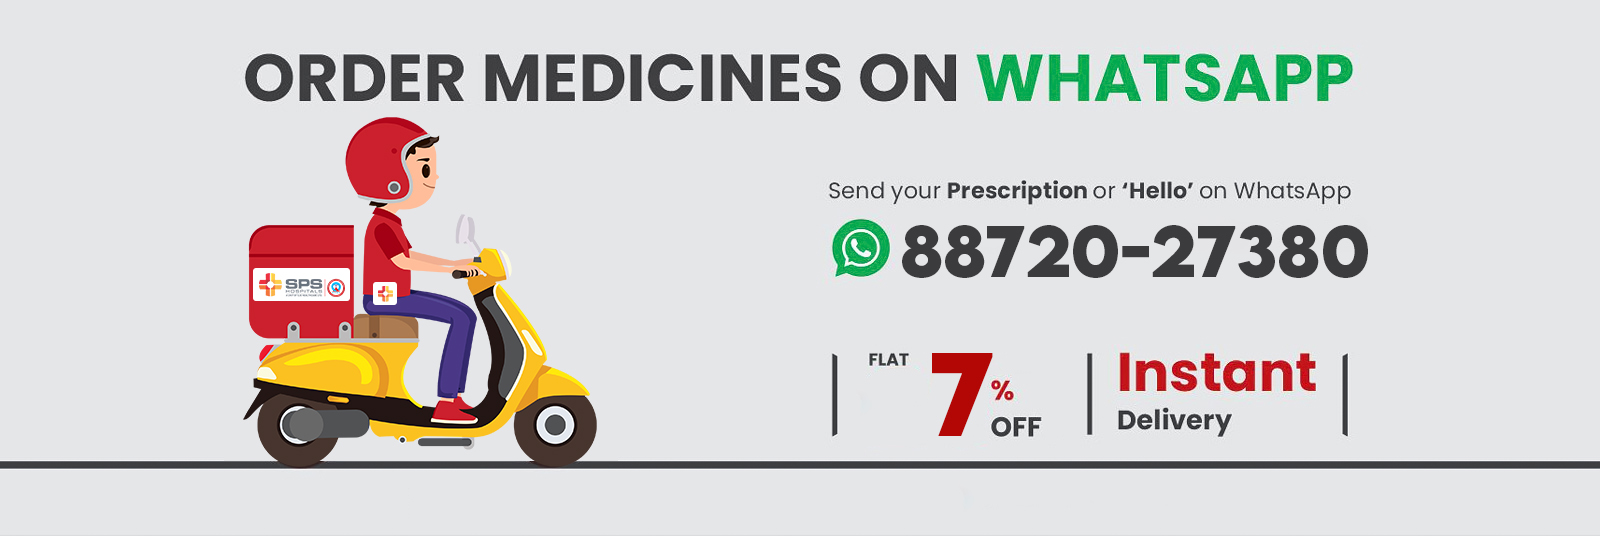 24*7 Pharmacy Whatsapp Delivery| SPS Hospitals